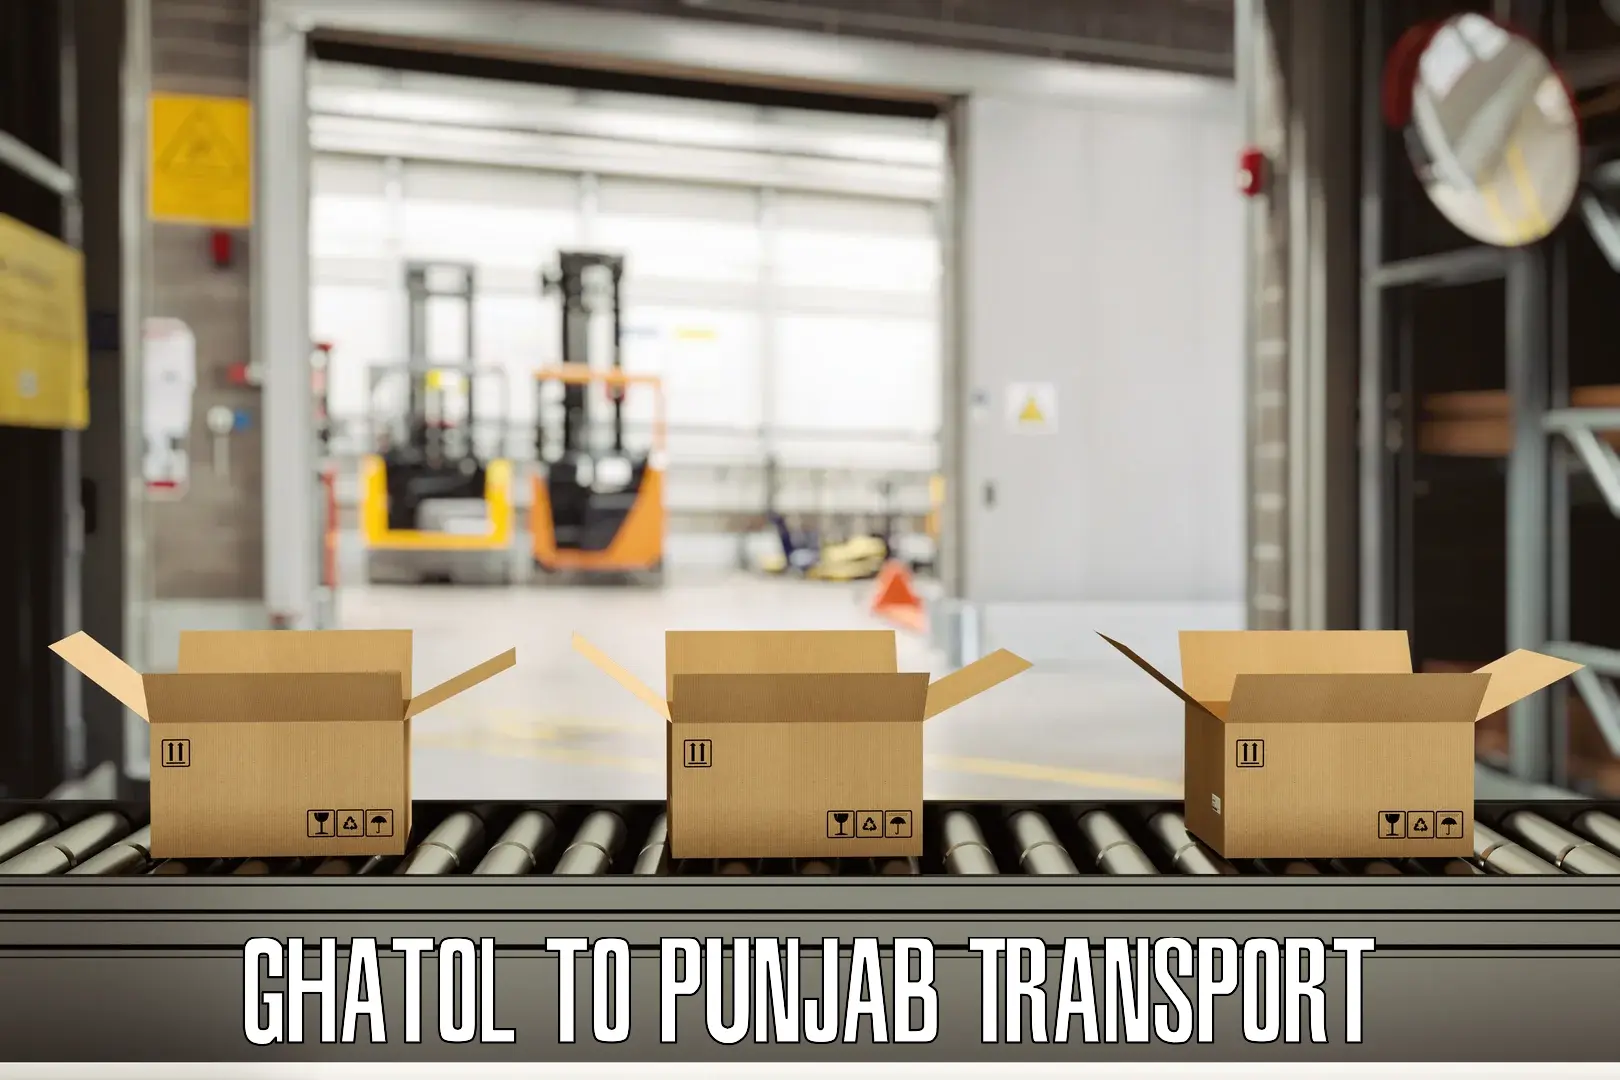 Transport shared services Ghatol to Punjab